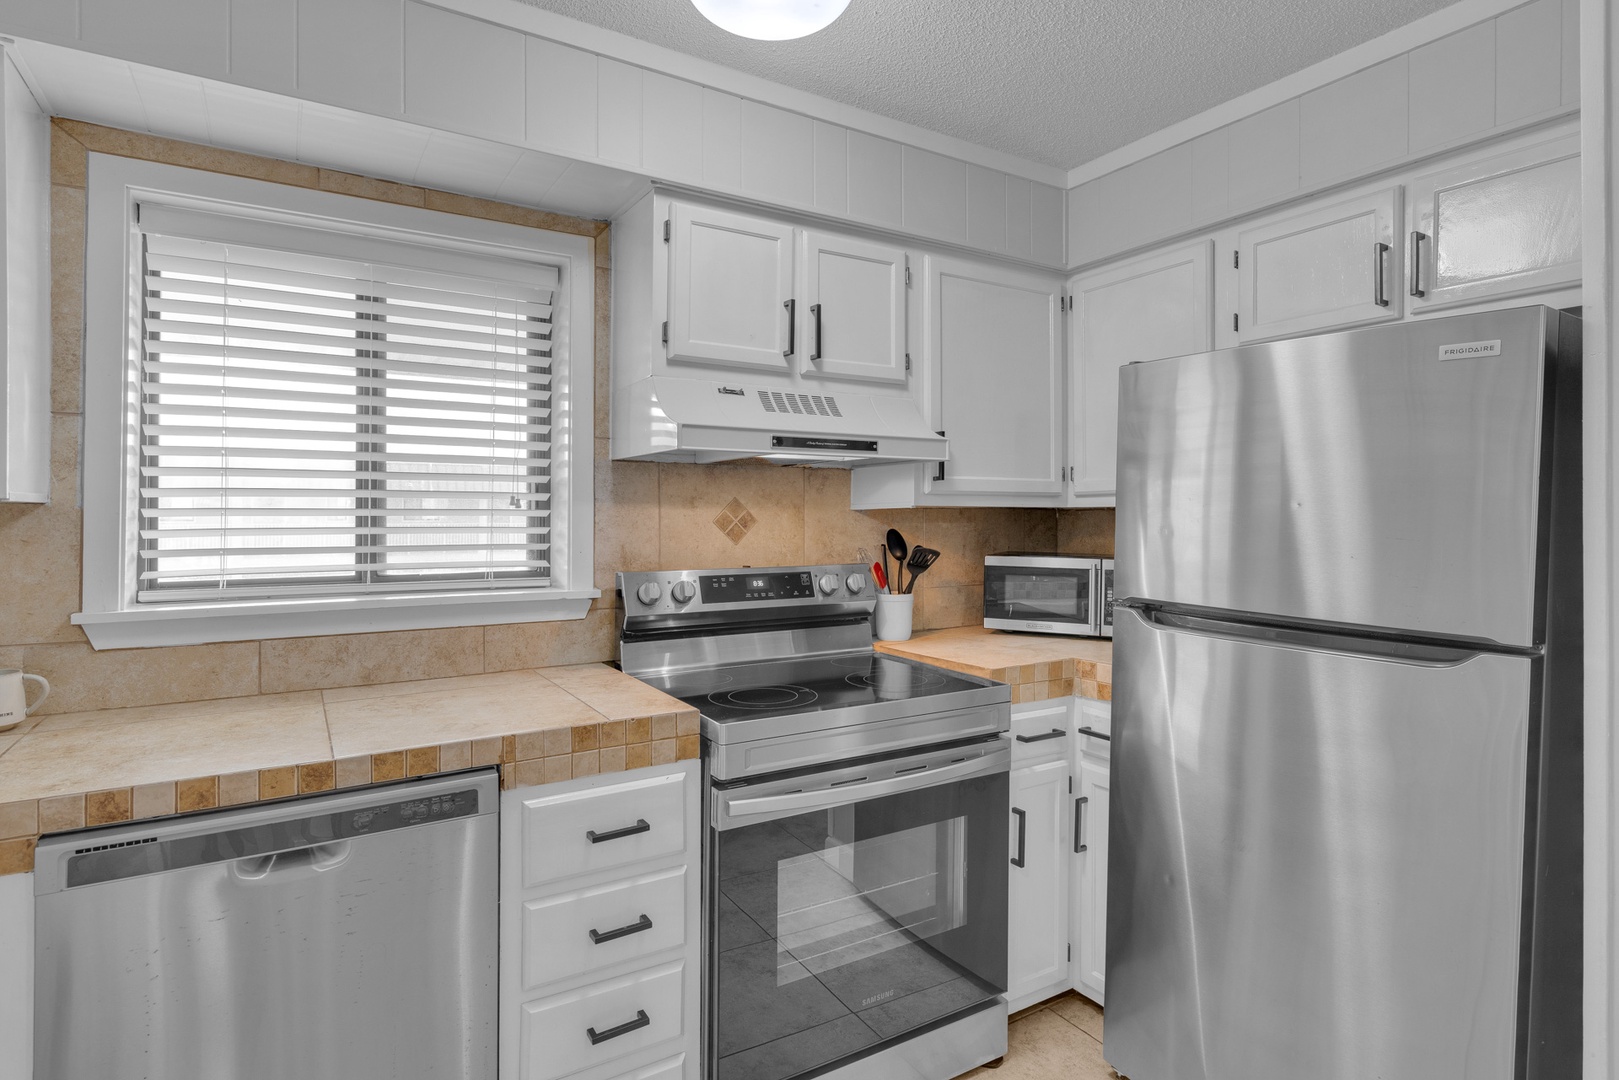 Bright fully equipped kitchen to craft culinary delights